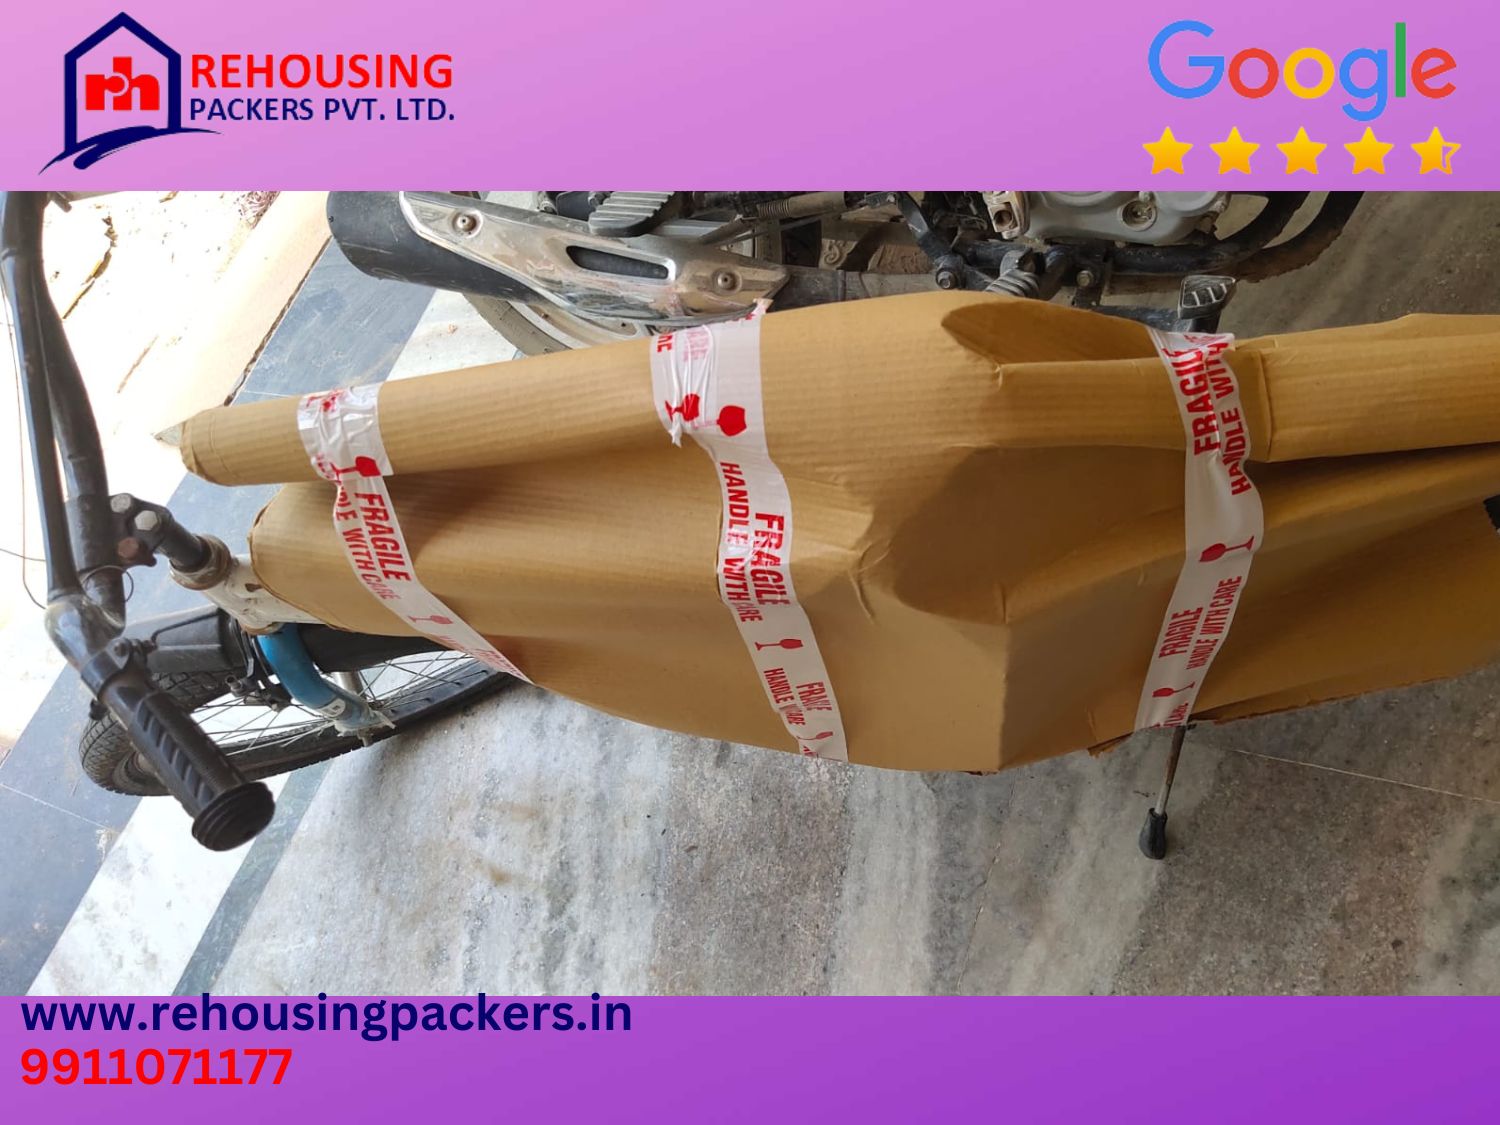 Packers and Movers from Noida to Faridabad